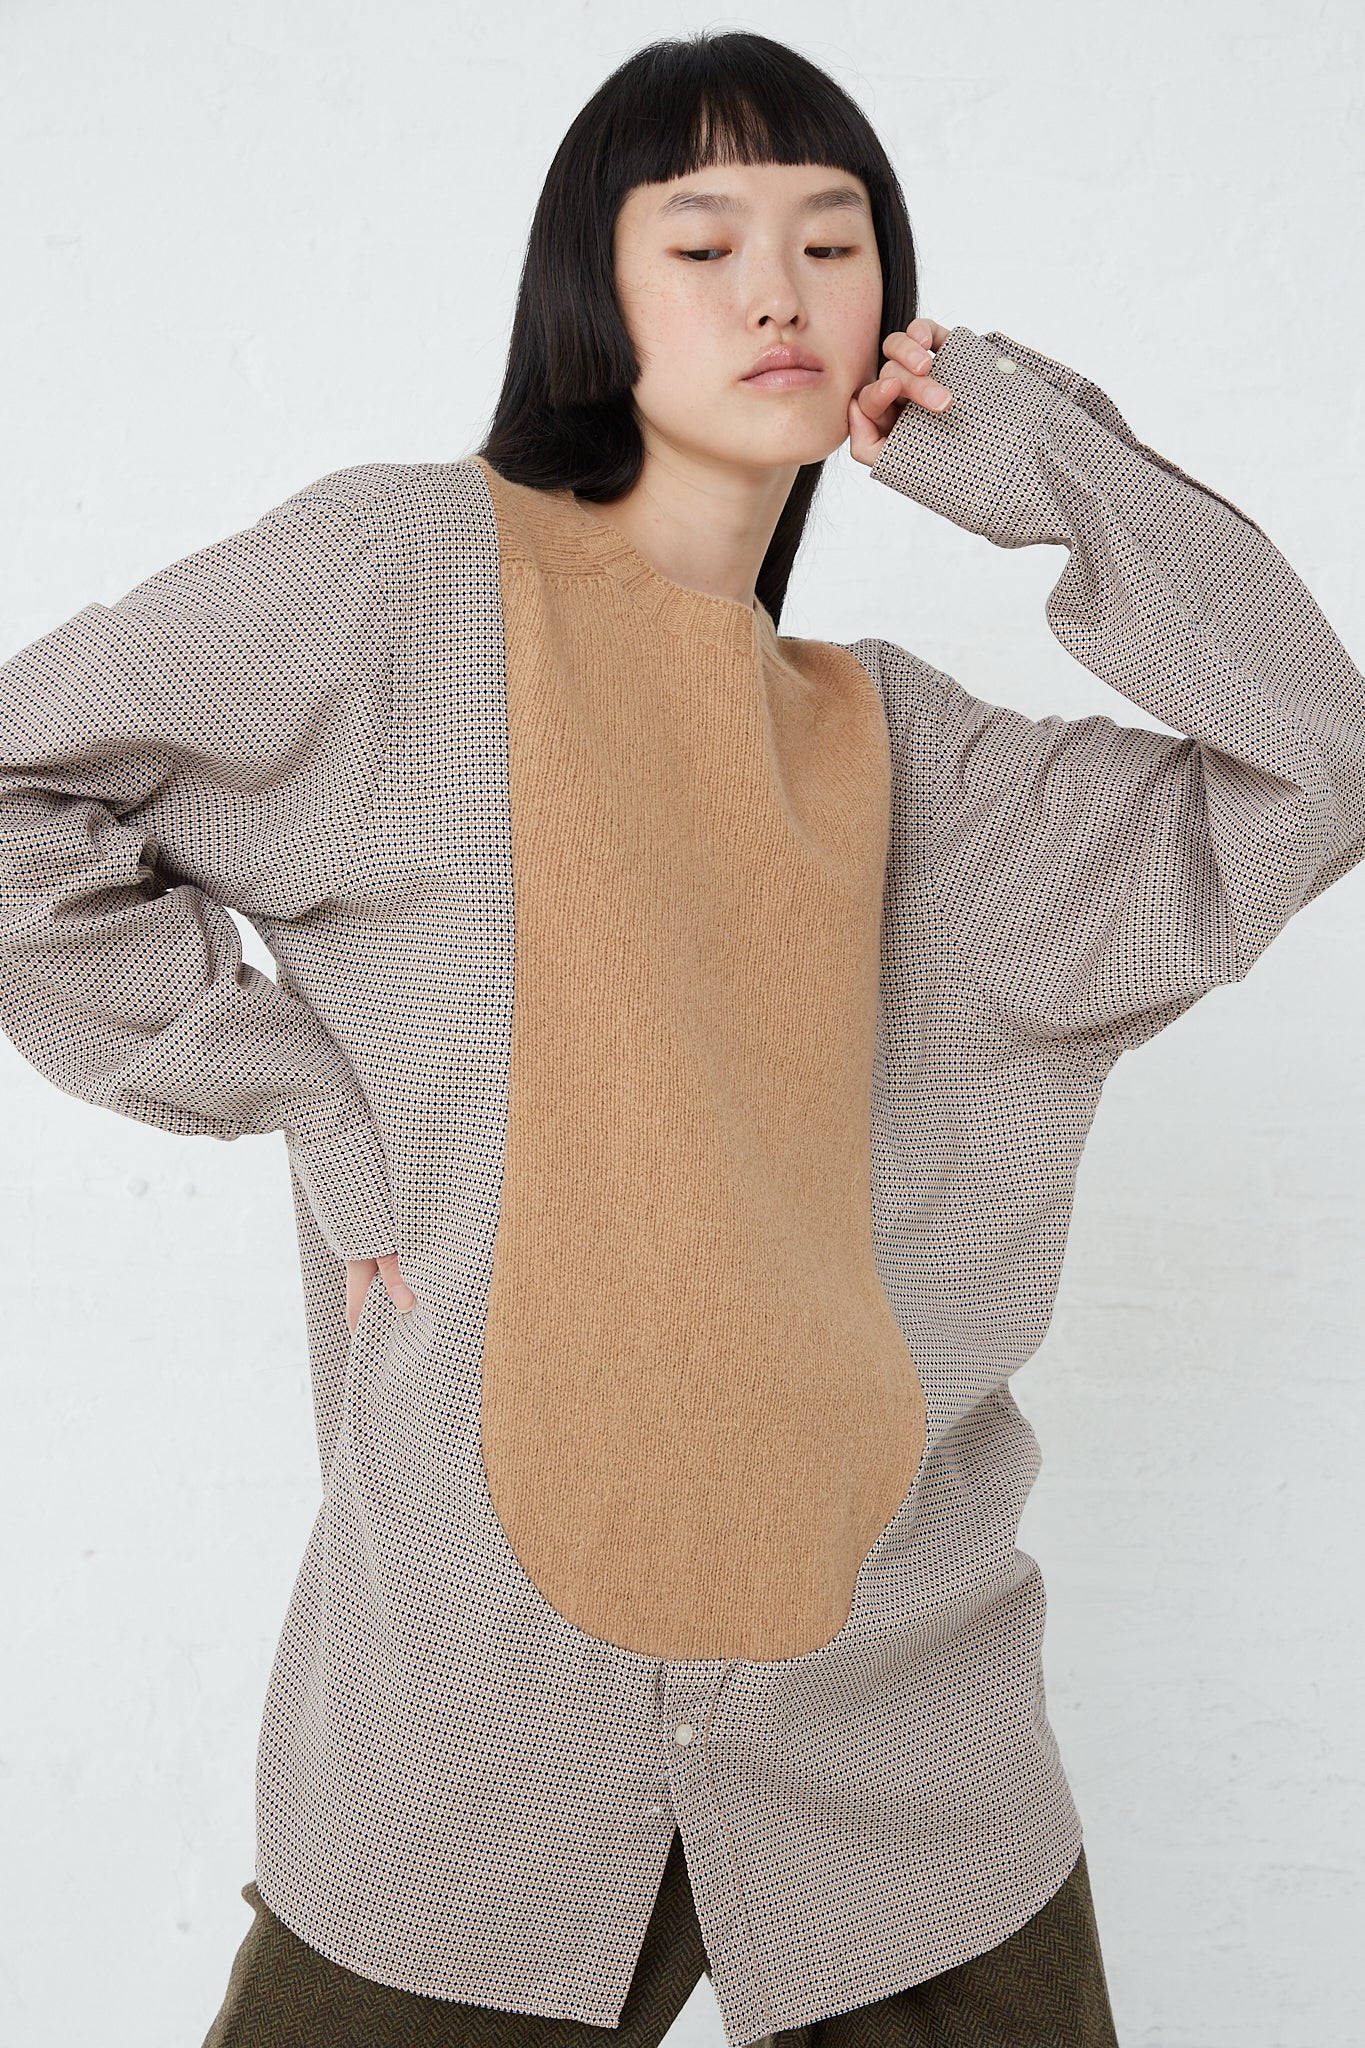 The model is wearing a Bless No.68 Front Insert Pullover in Beige Pattern with a tan patch.